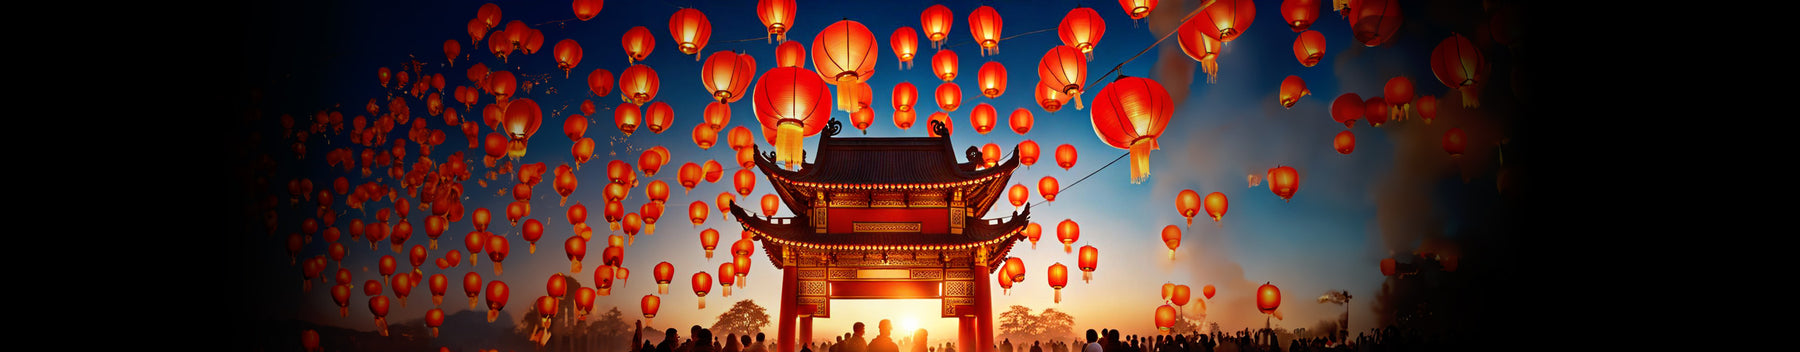 What is the Chinese Lantern Festival?